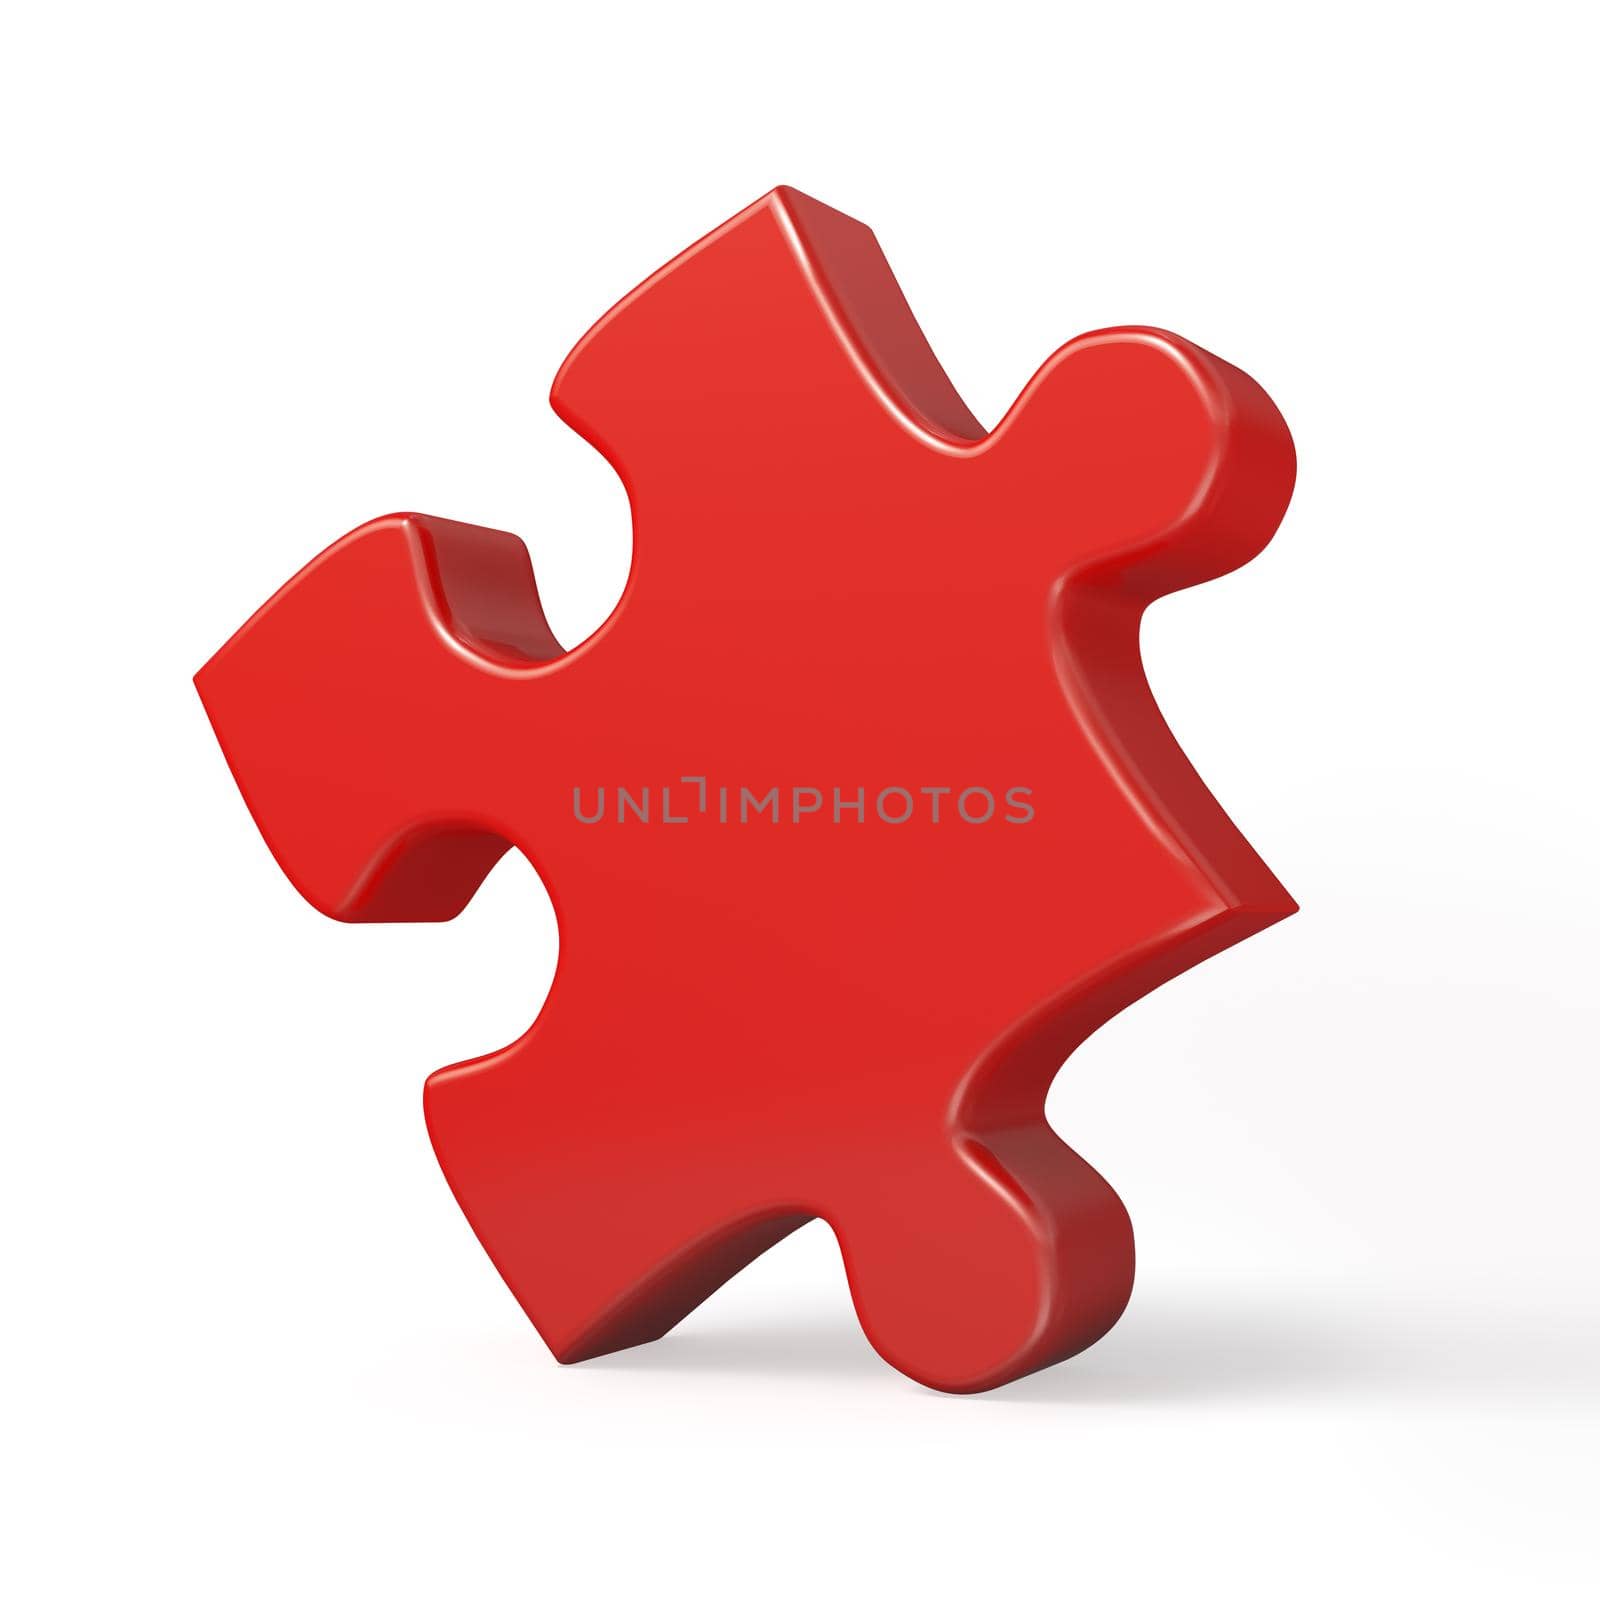 Single red puzzle piece isolated on white background